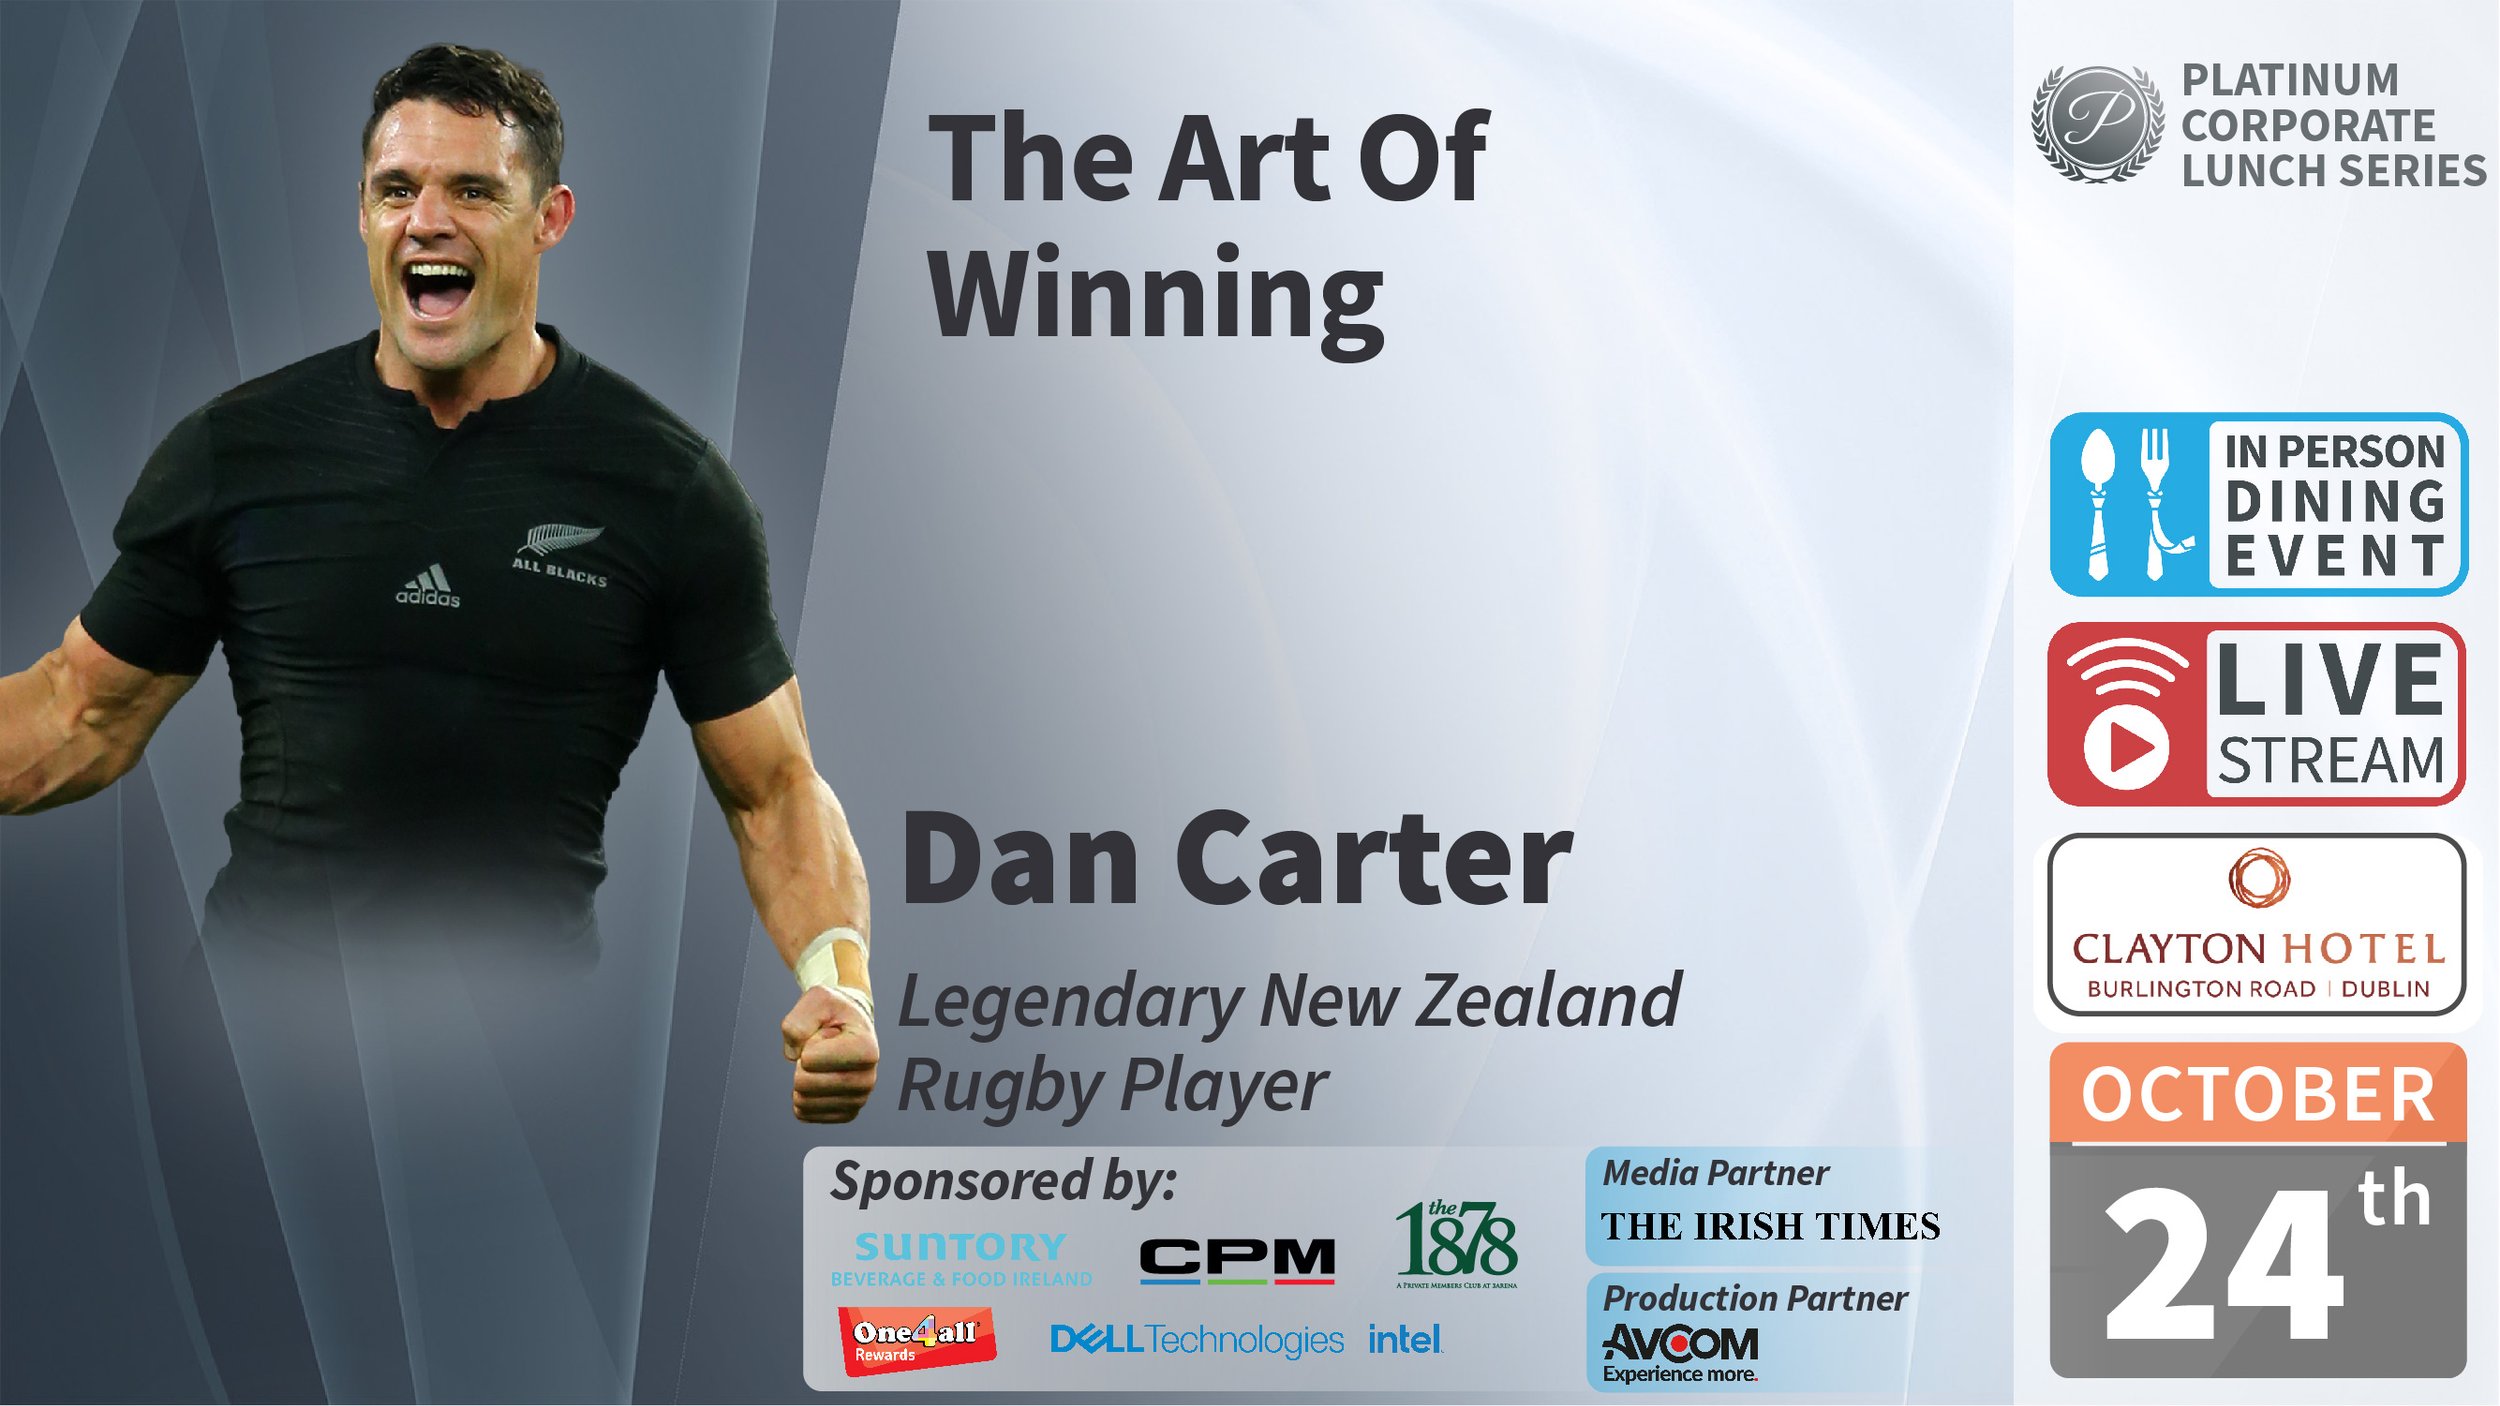 By the numbers: Dan Carter's road to World Rugby player of the